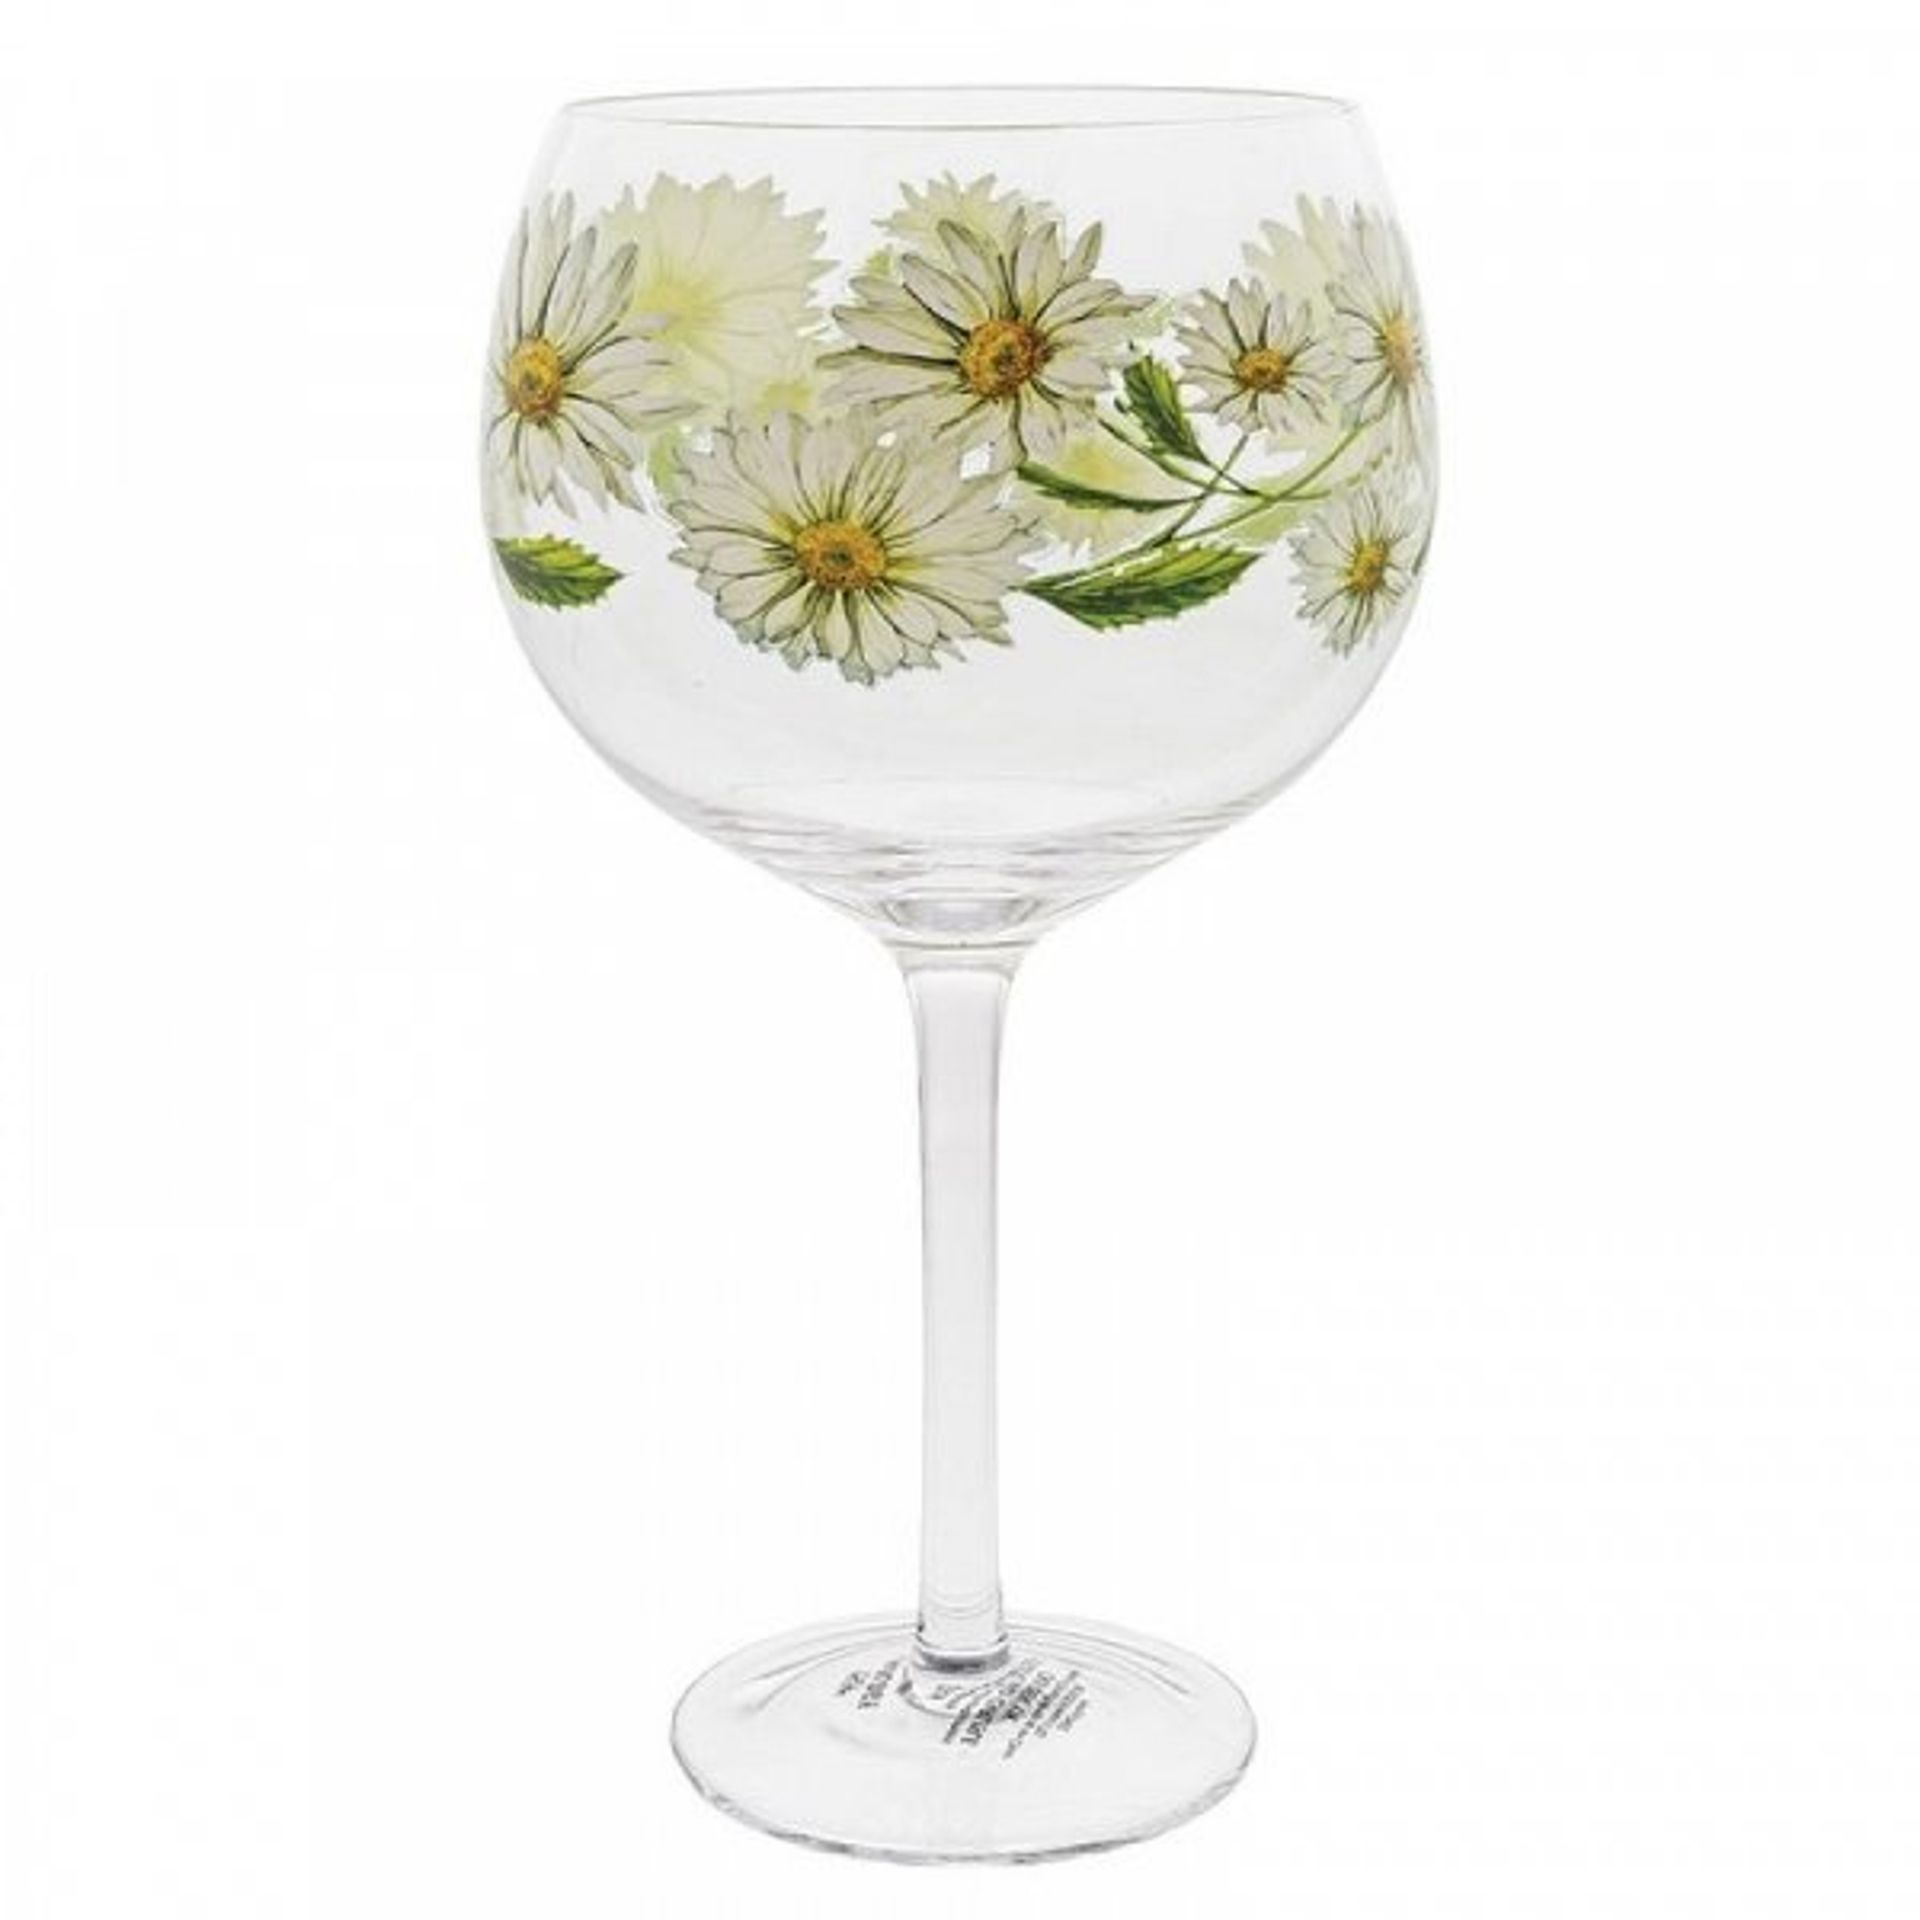 RRP £12.99 - New Ginology Daisy Kingfisher Copa Gin Glass - Comes In A Gift Box